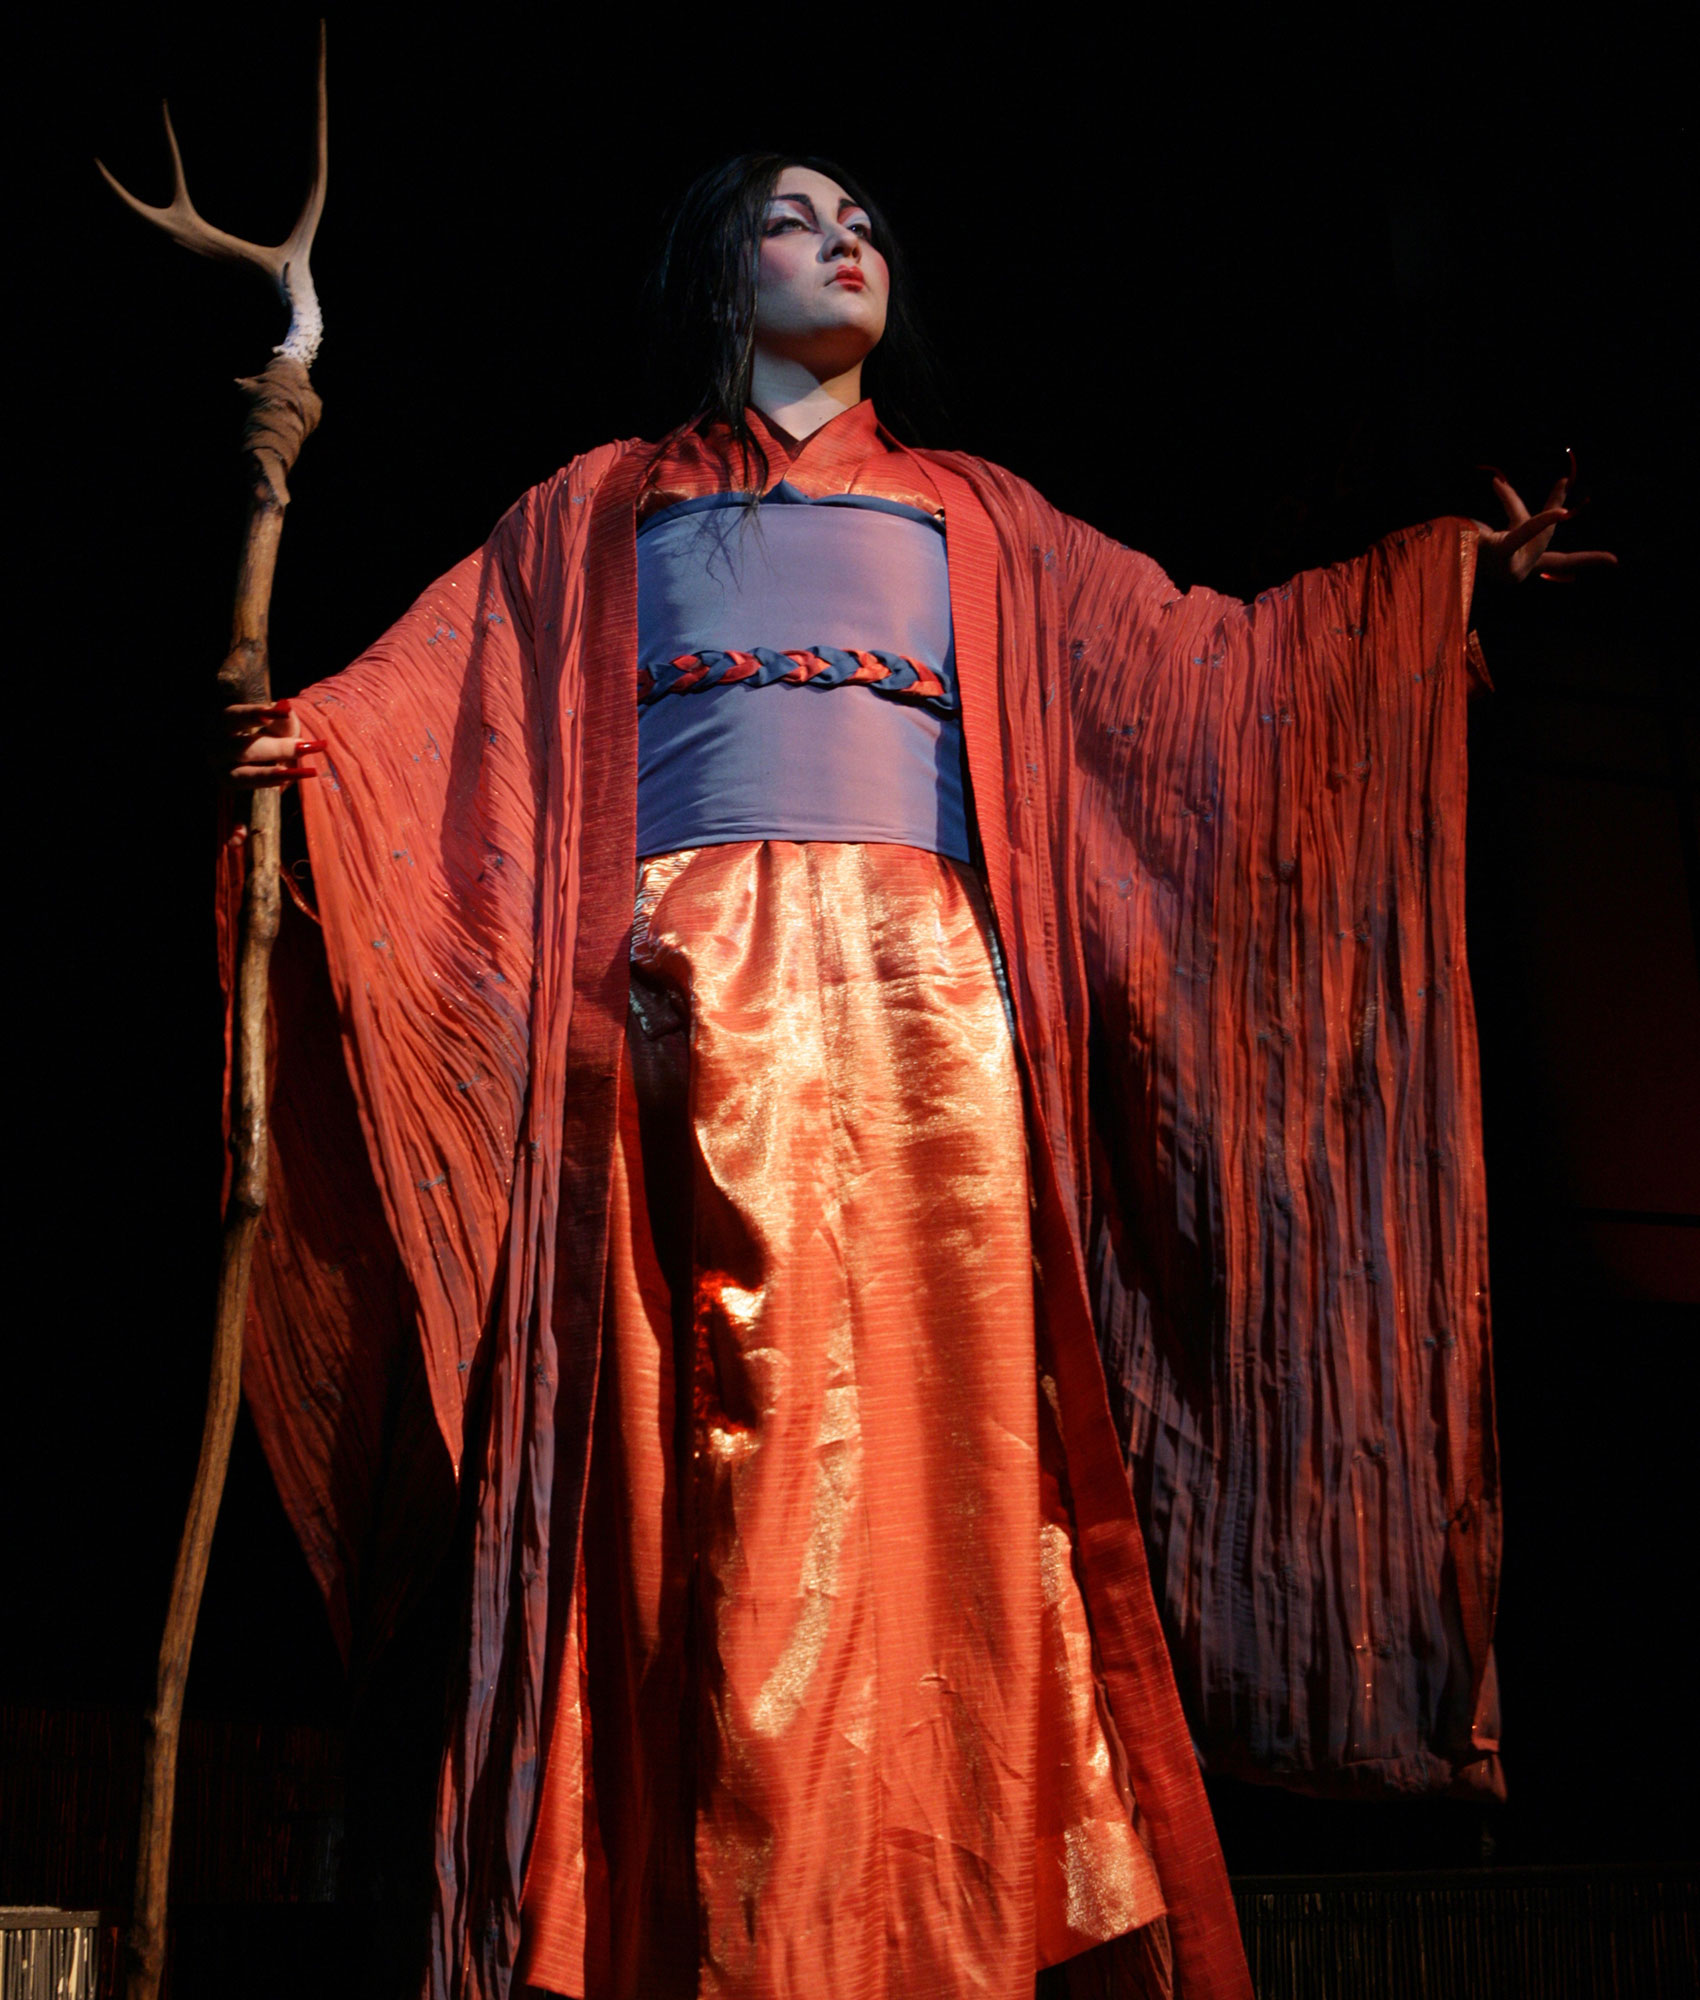 A woman with colorful makeup and attire holds a wooden staff topped with an antler in one hand and raises her other palm with her fingers outstretched.